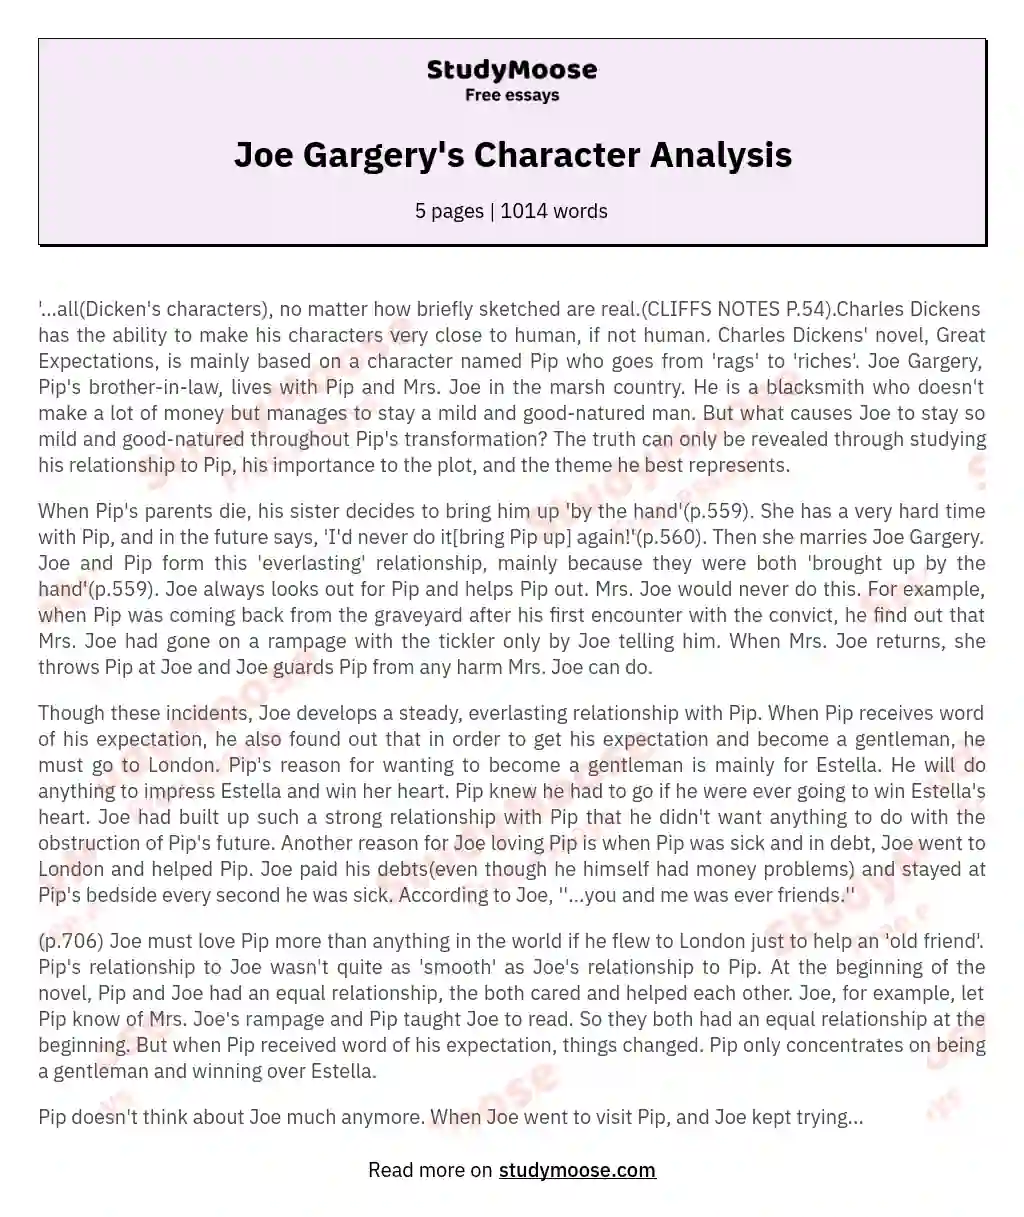 Joe Gargery's Enduring Impact in 'Great Expectations' essay